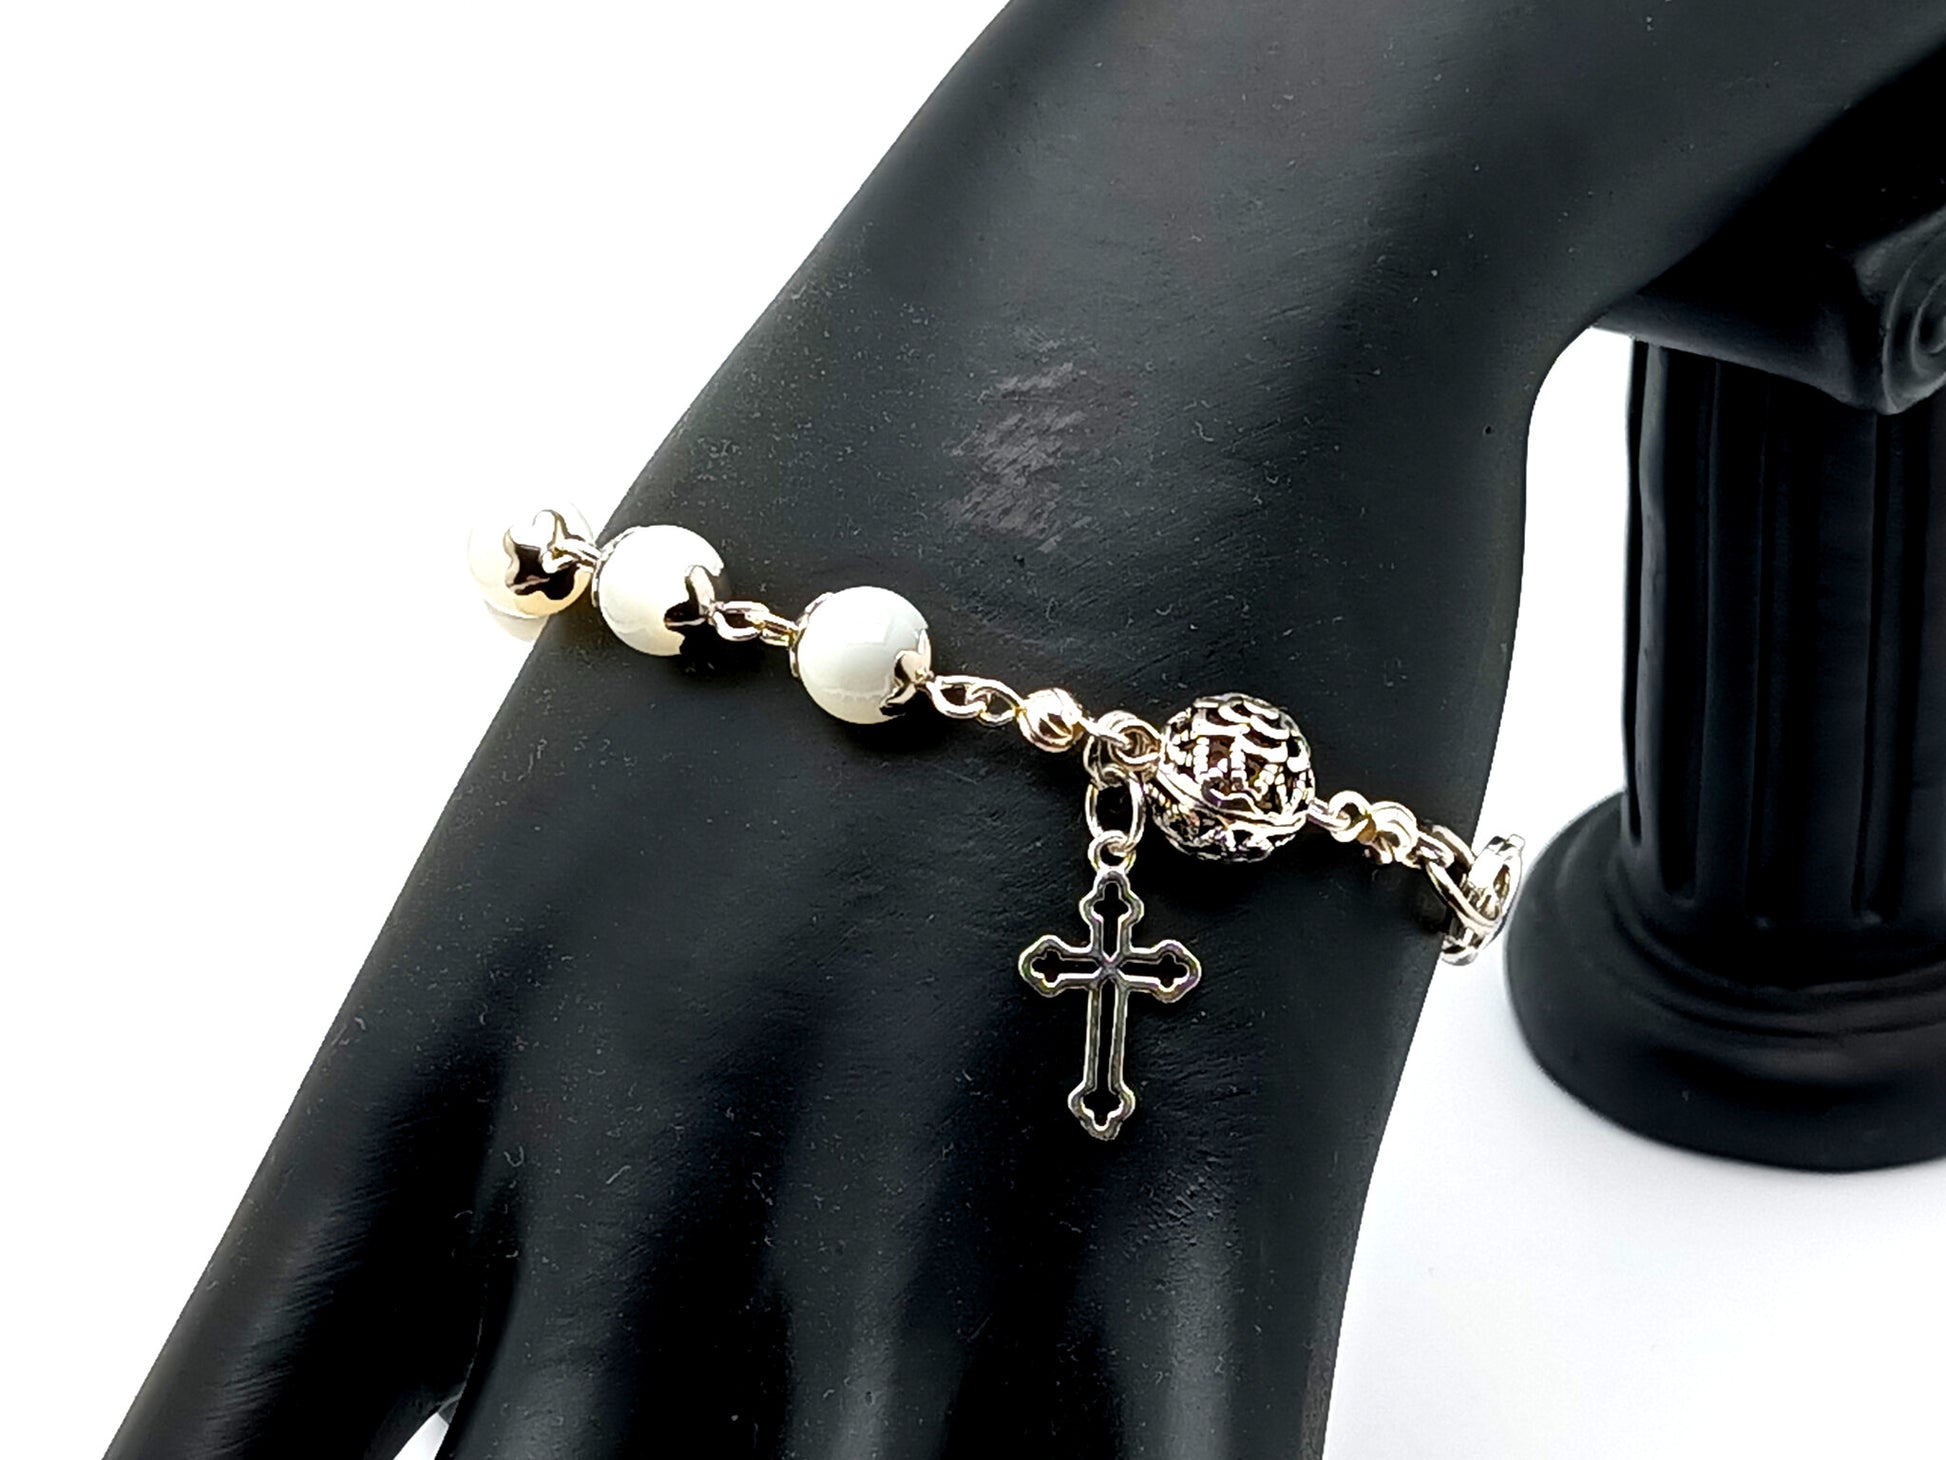 Mother of pearl unique rosary beads single decade rosary bracelet with gemstone and sterling silver beads and sterling silver cross.